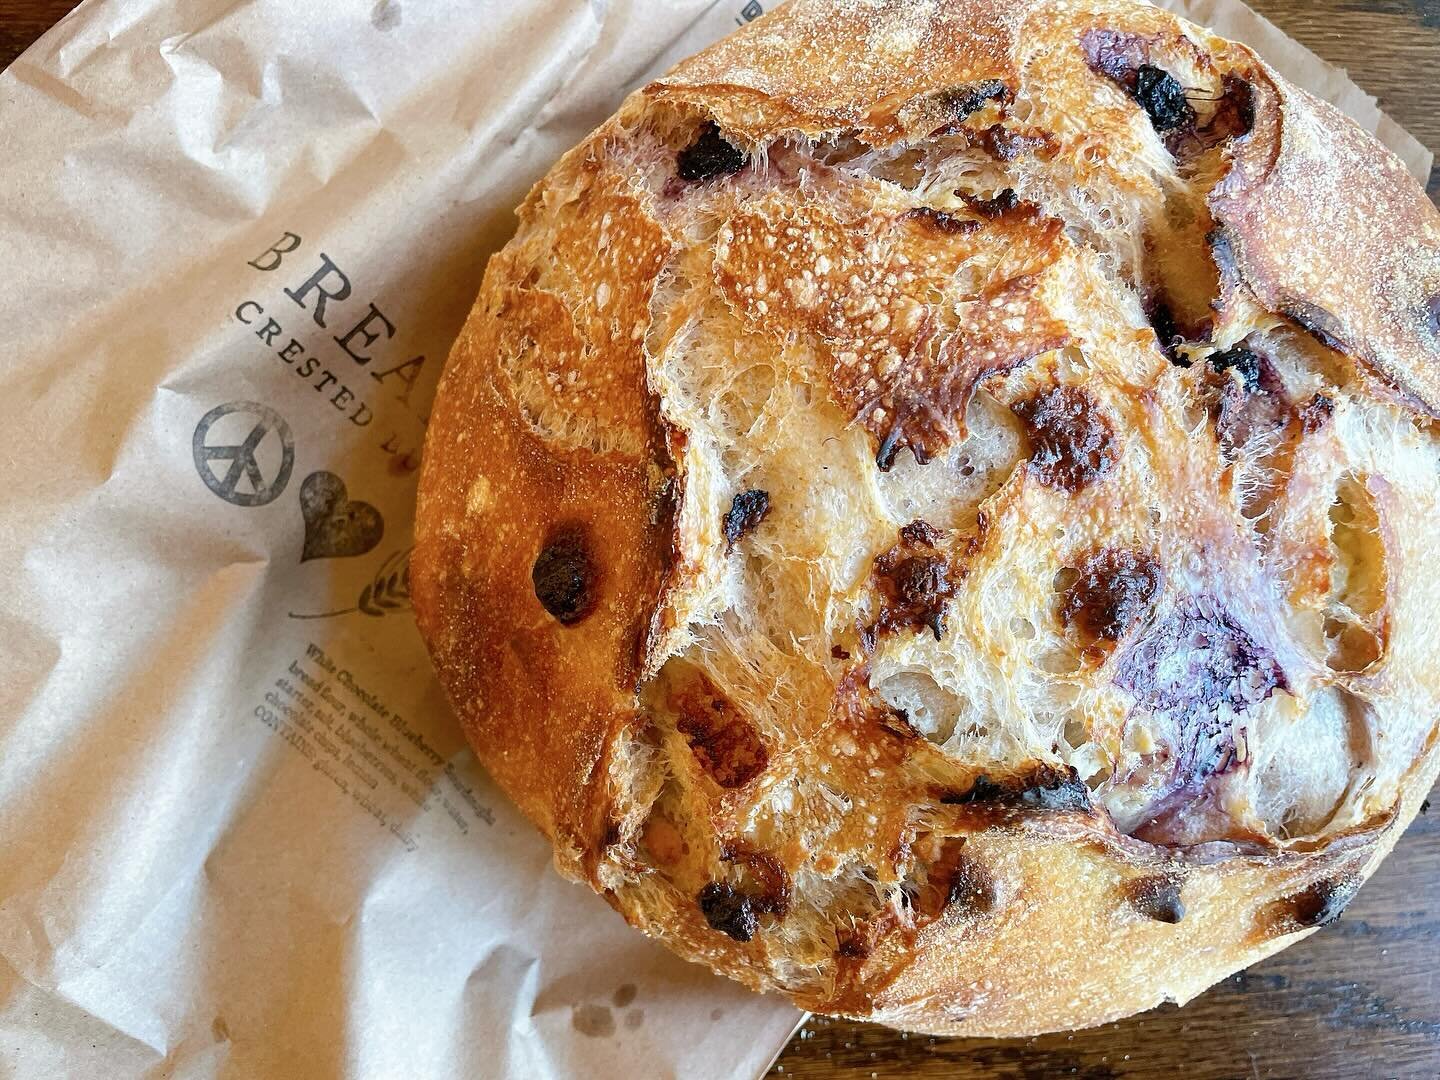 Blueberry white chocolate sourdough for retail sale tonight! Last couple days for bread until June!